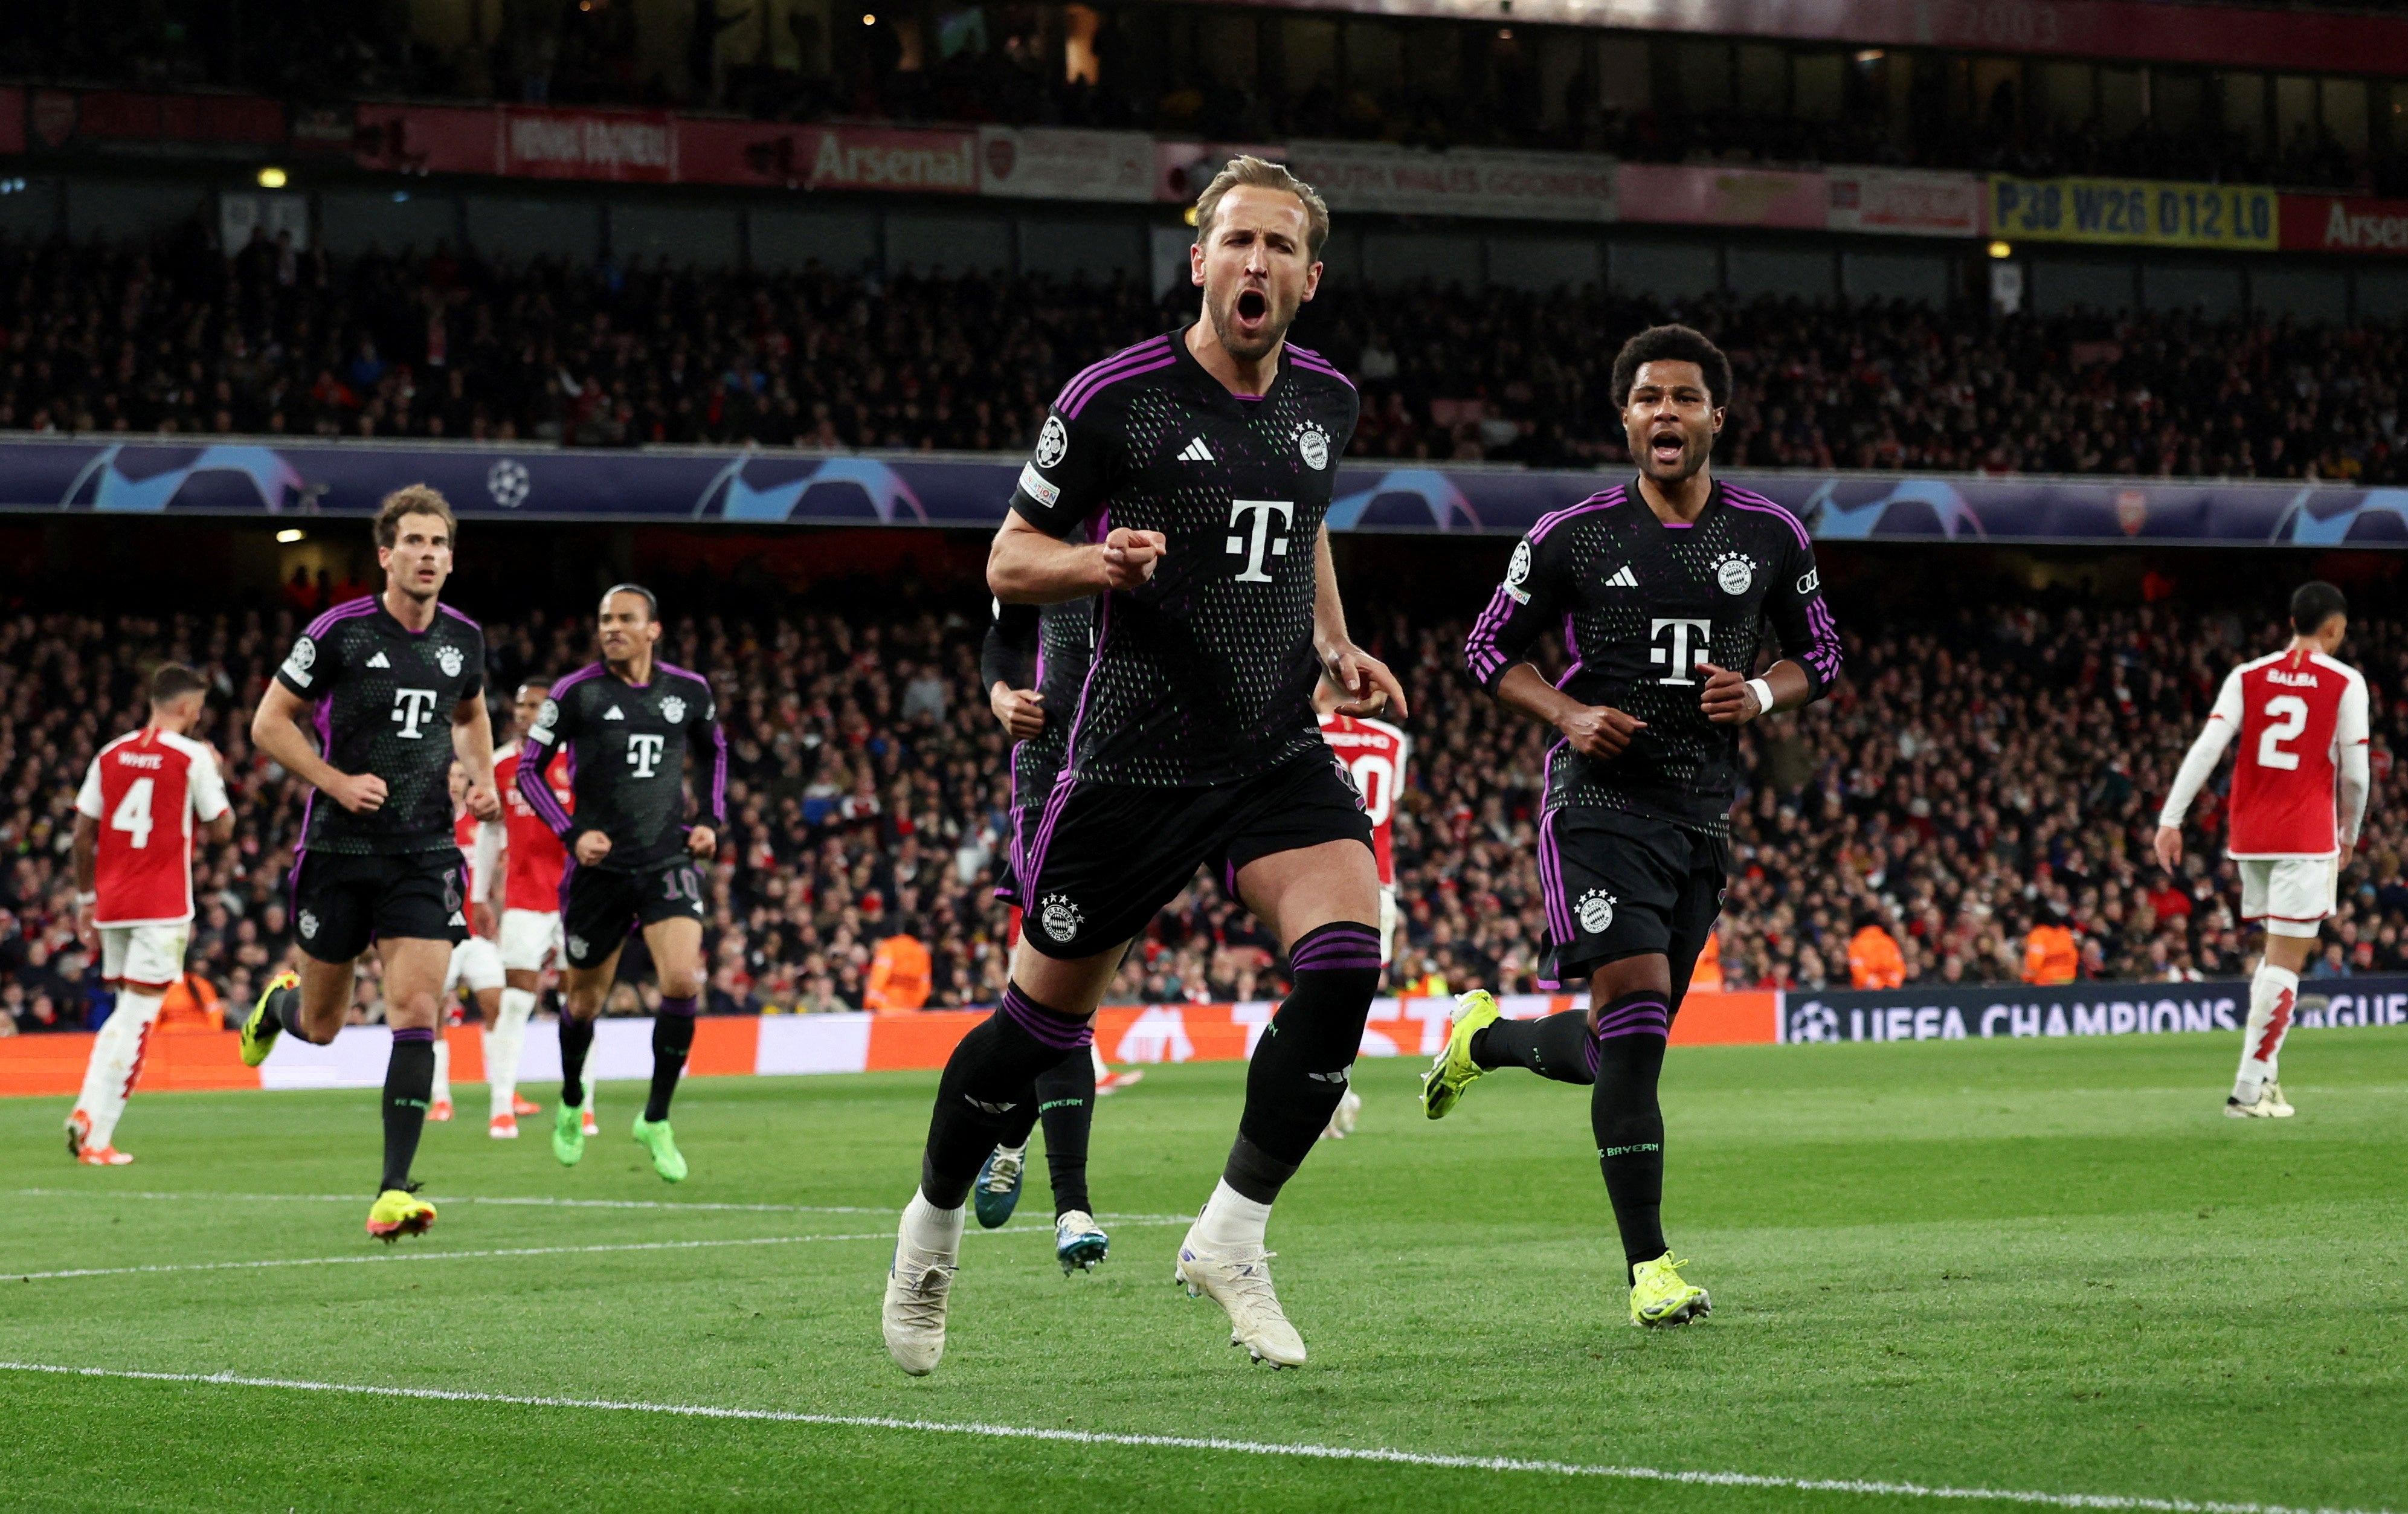 Bayern Munich are hoping the experience of Harry Kane and other key members of the team can get them over the line